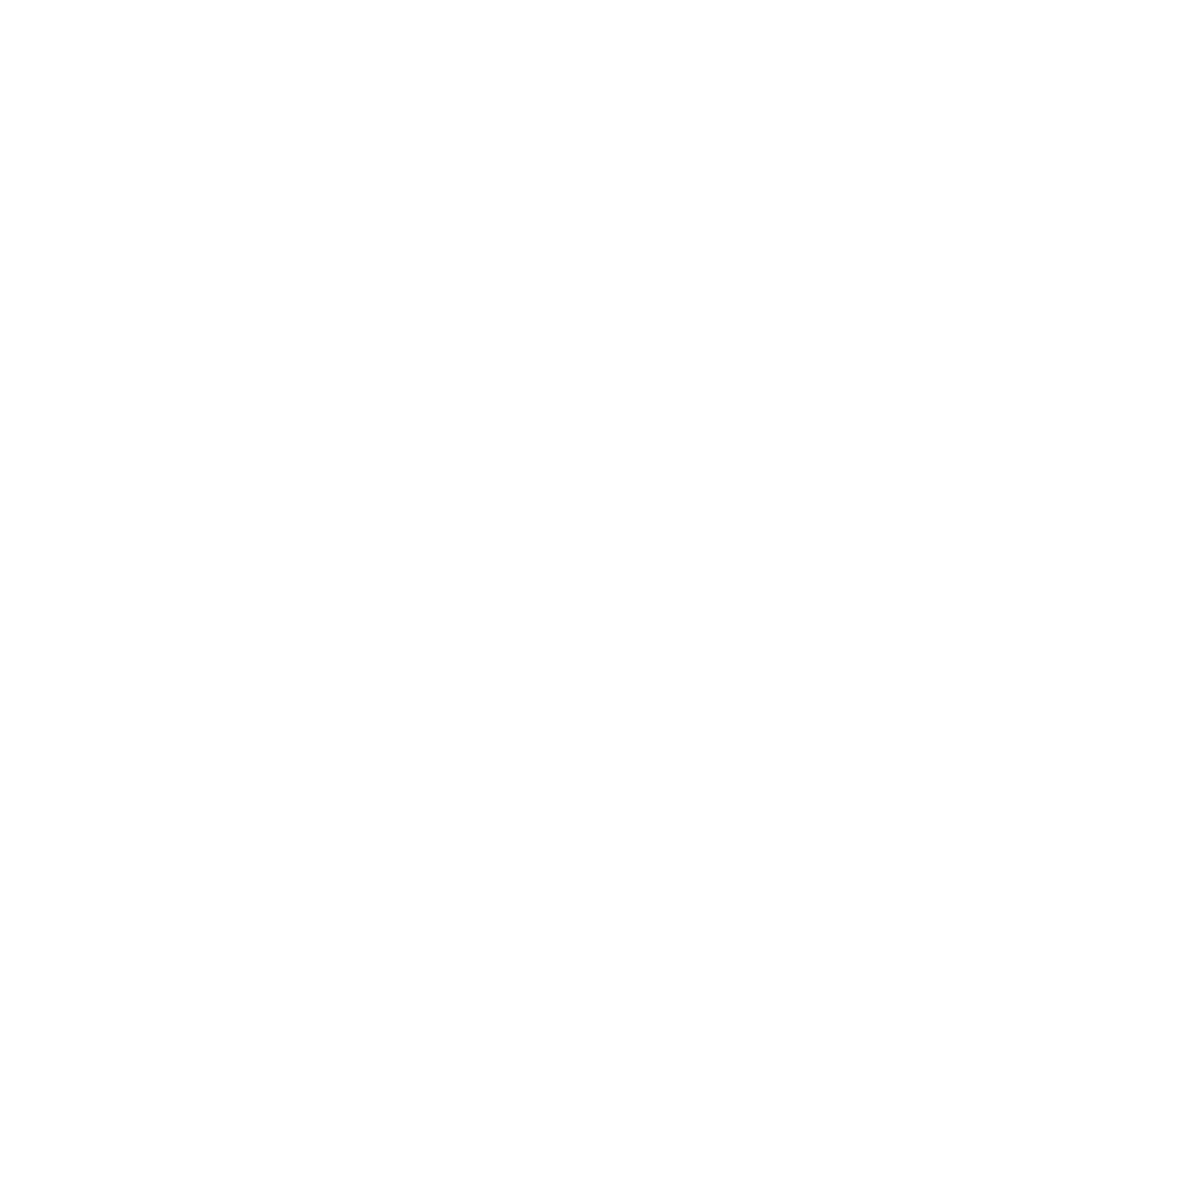 Try No Agency